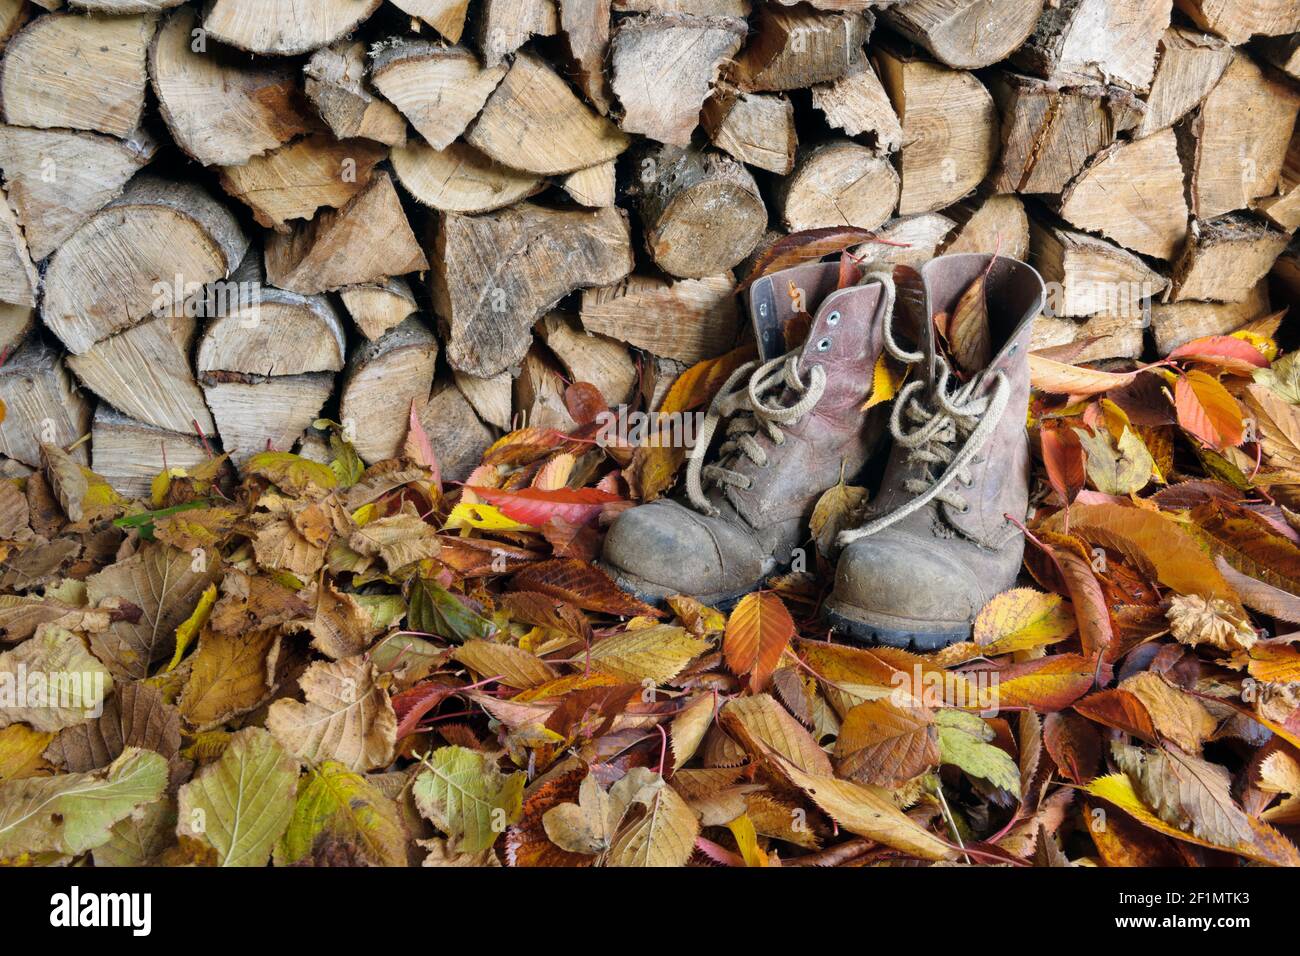 Old work boots in wood shed, on a bed of fallen autumn leaves. Stock Photo